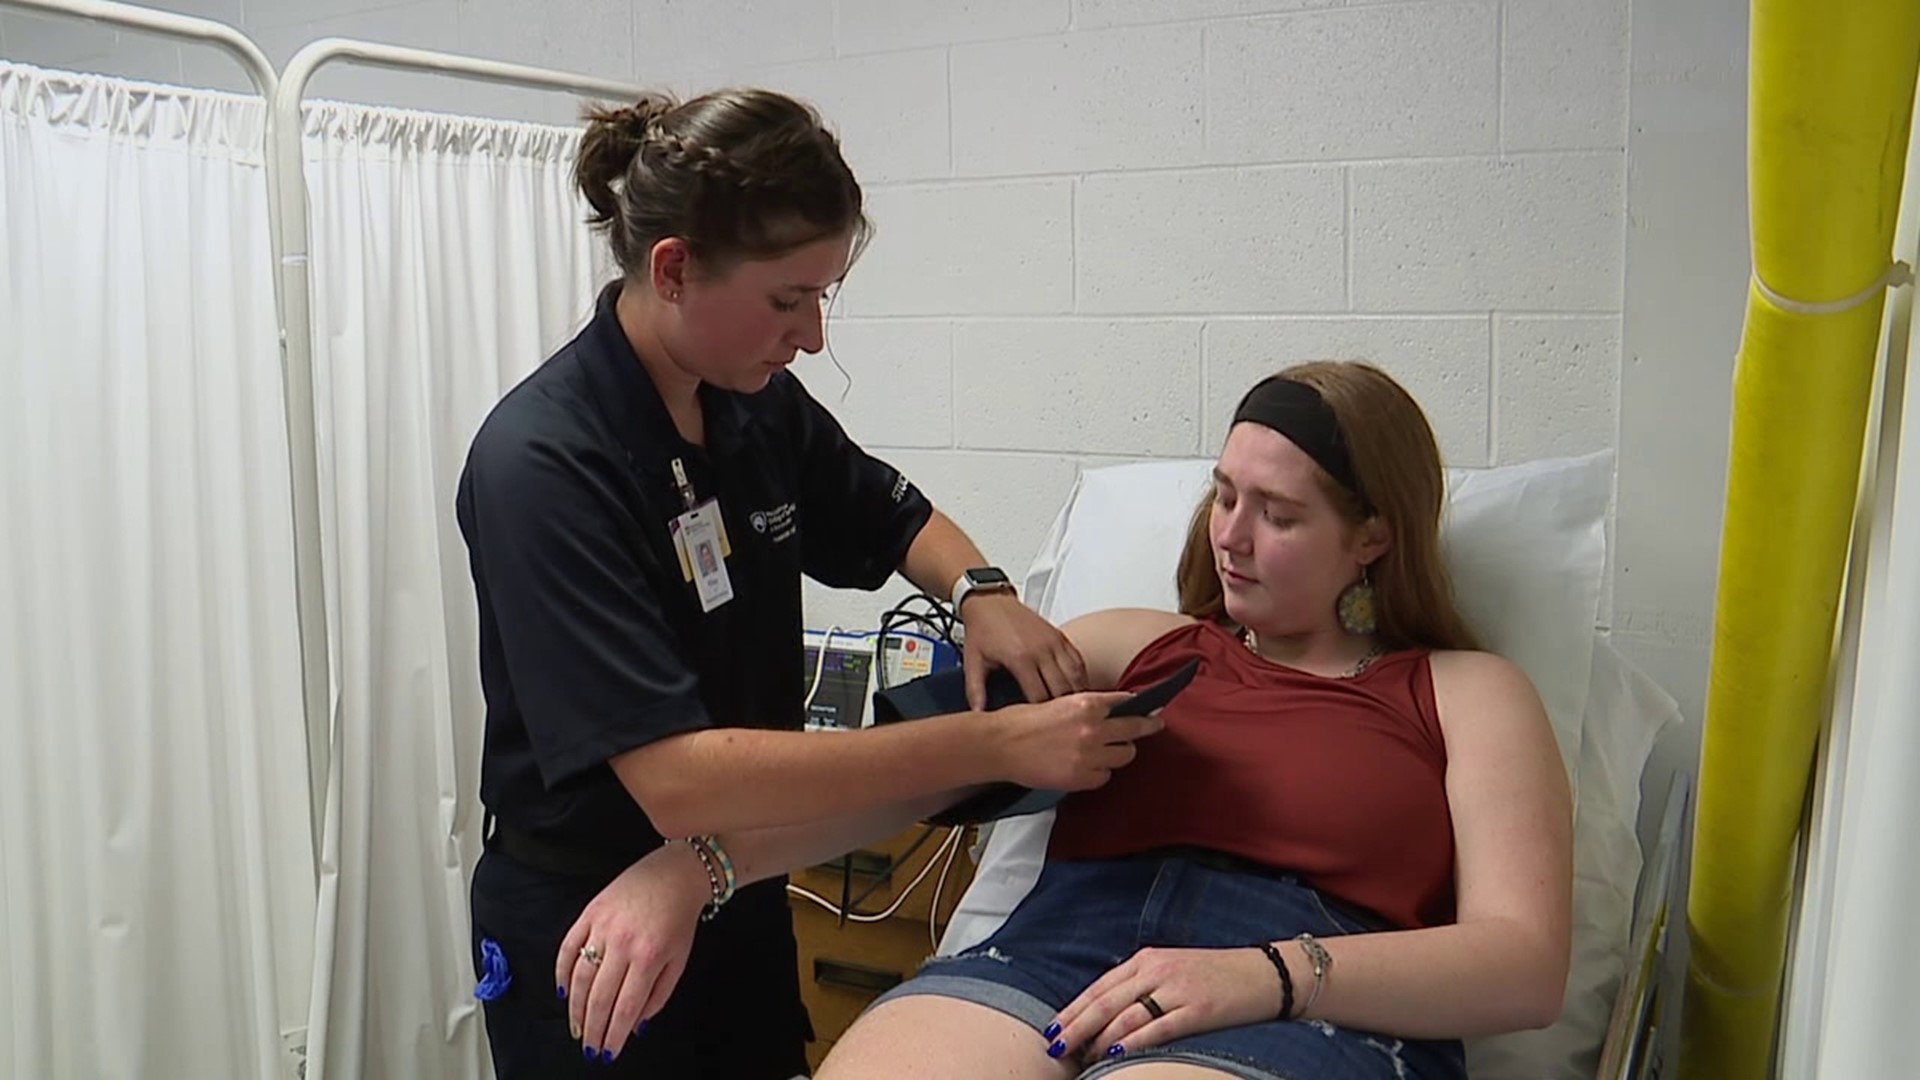 As hundreds of people gather in South Williamsport for week two of the Little League World Series, medical personnel are working to make sure they stay safe.